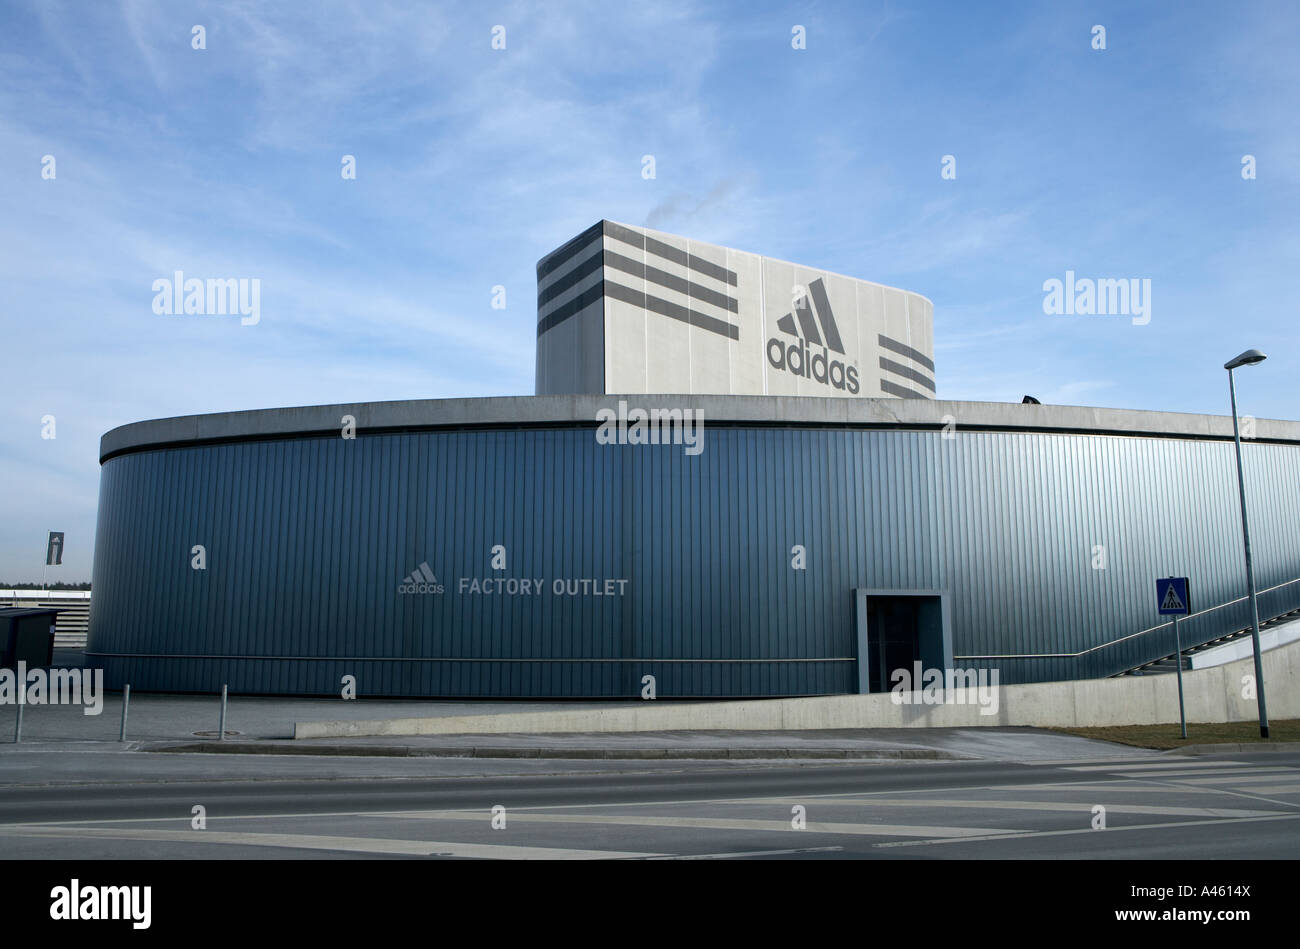 adidas official outlet